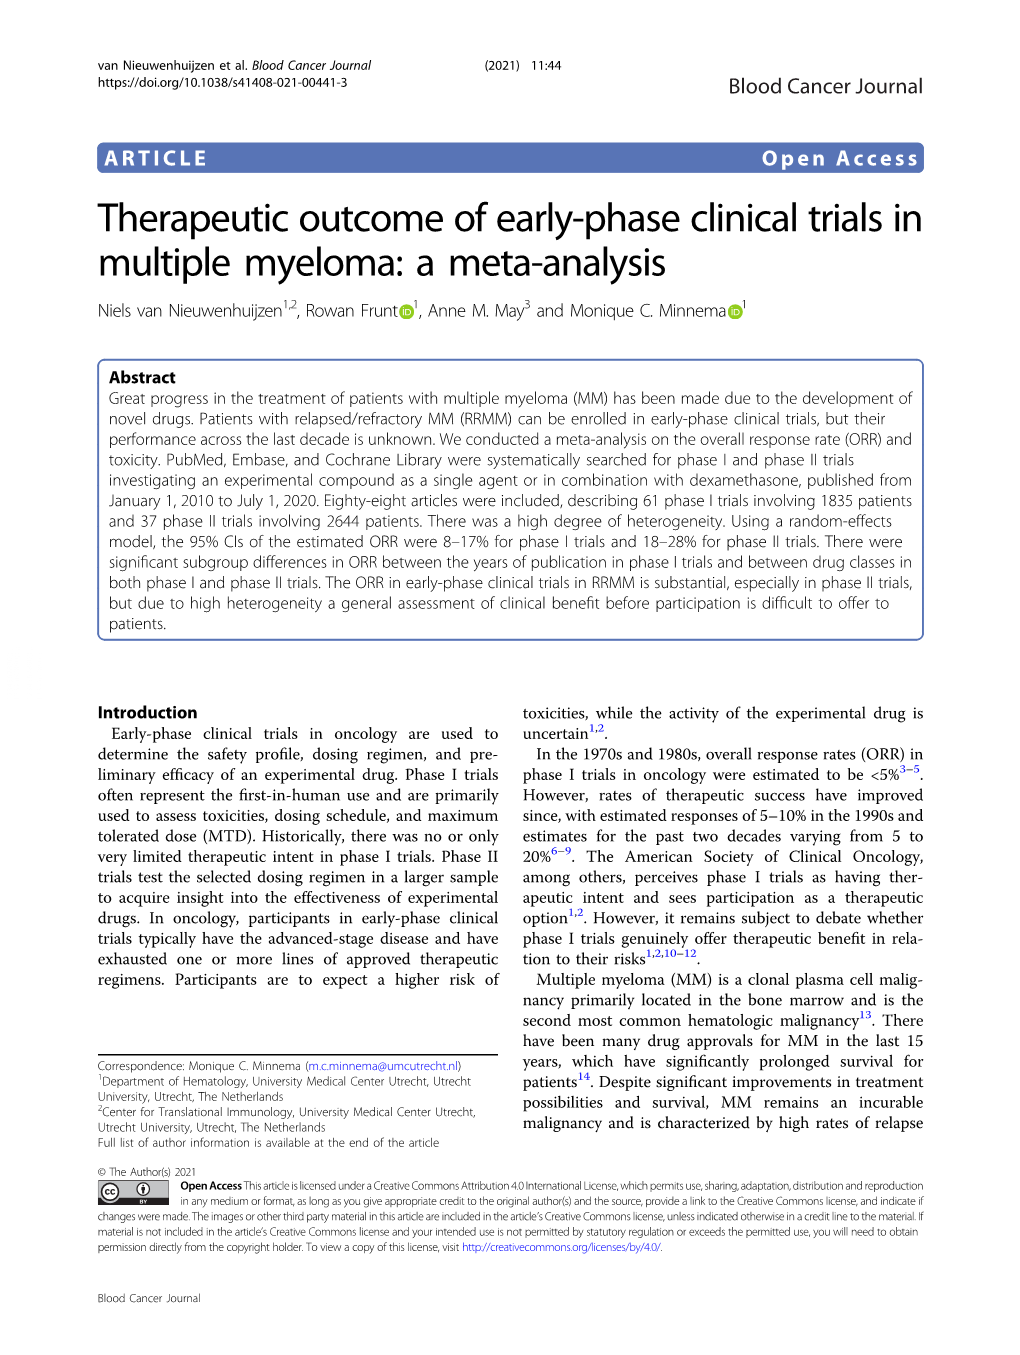 Therapeutic Outcome of Early-Phase Clinical Trials in Multiple Myeloma: a Meta-Analysis Niels Van Nieuwenhuijzen1,2,Rowanfrunt 1, Anne M